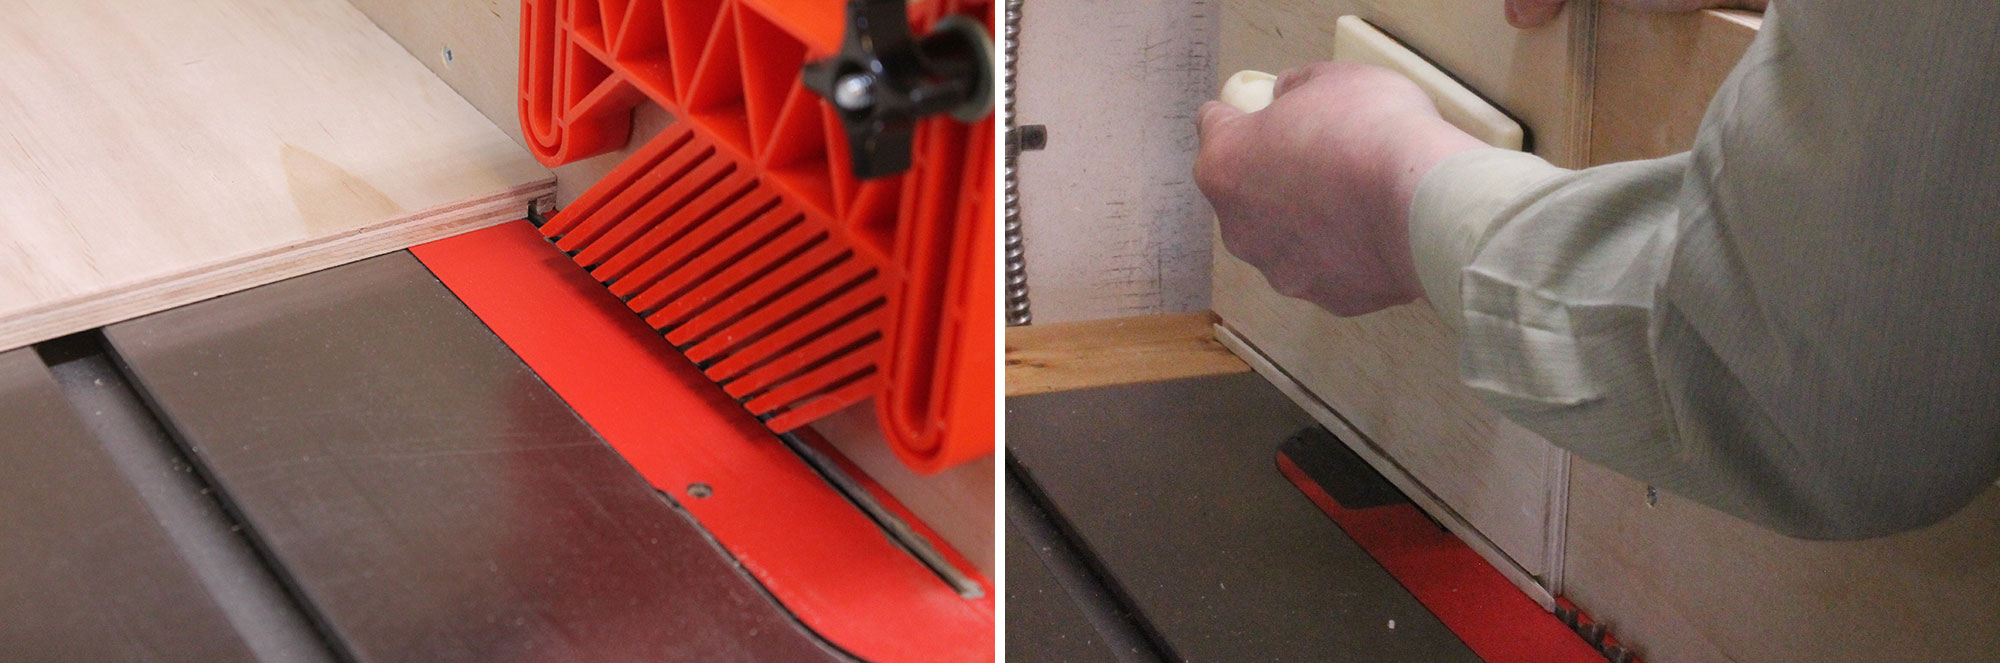 Image left: Making a rabbet cut on a table saw. Image right: Making a second cut on a table saw.